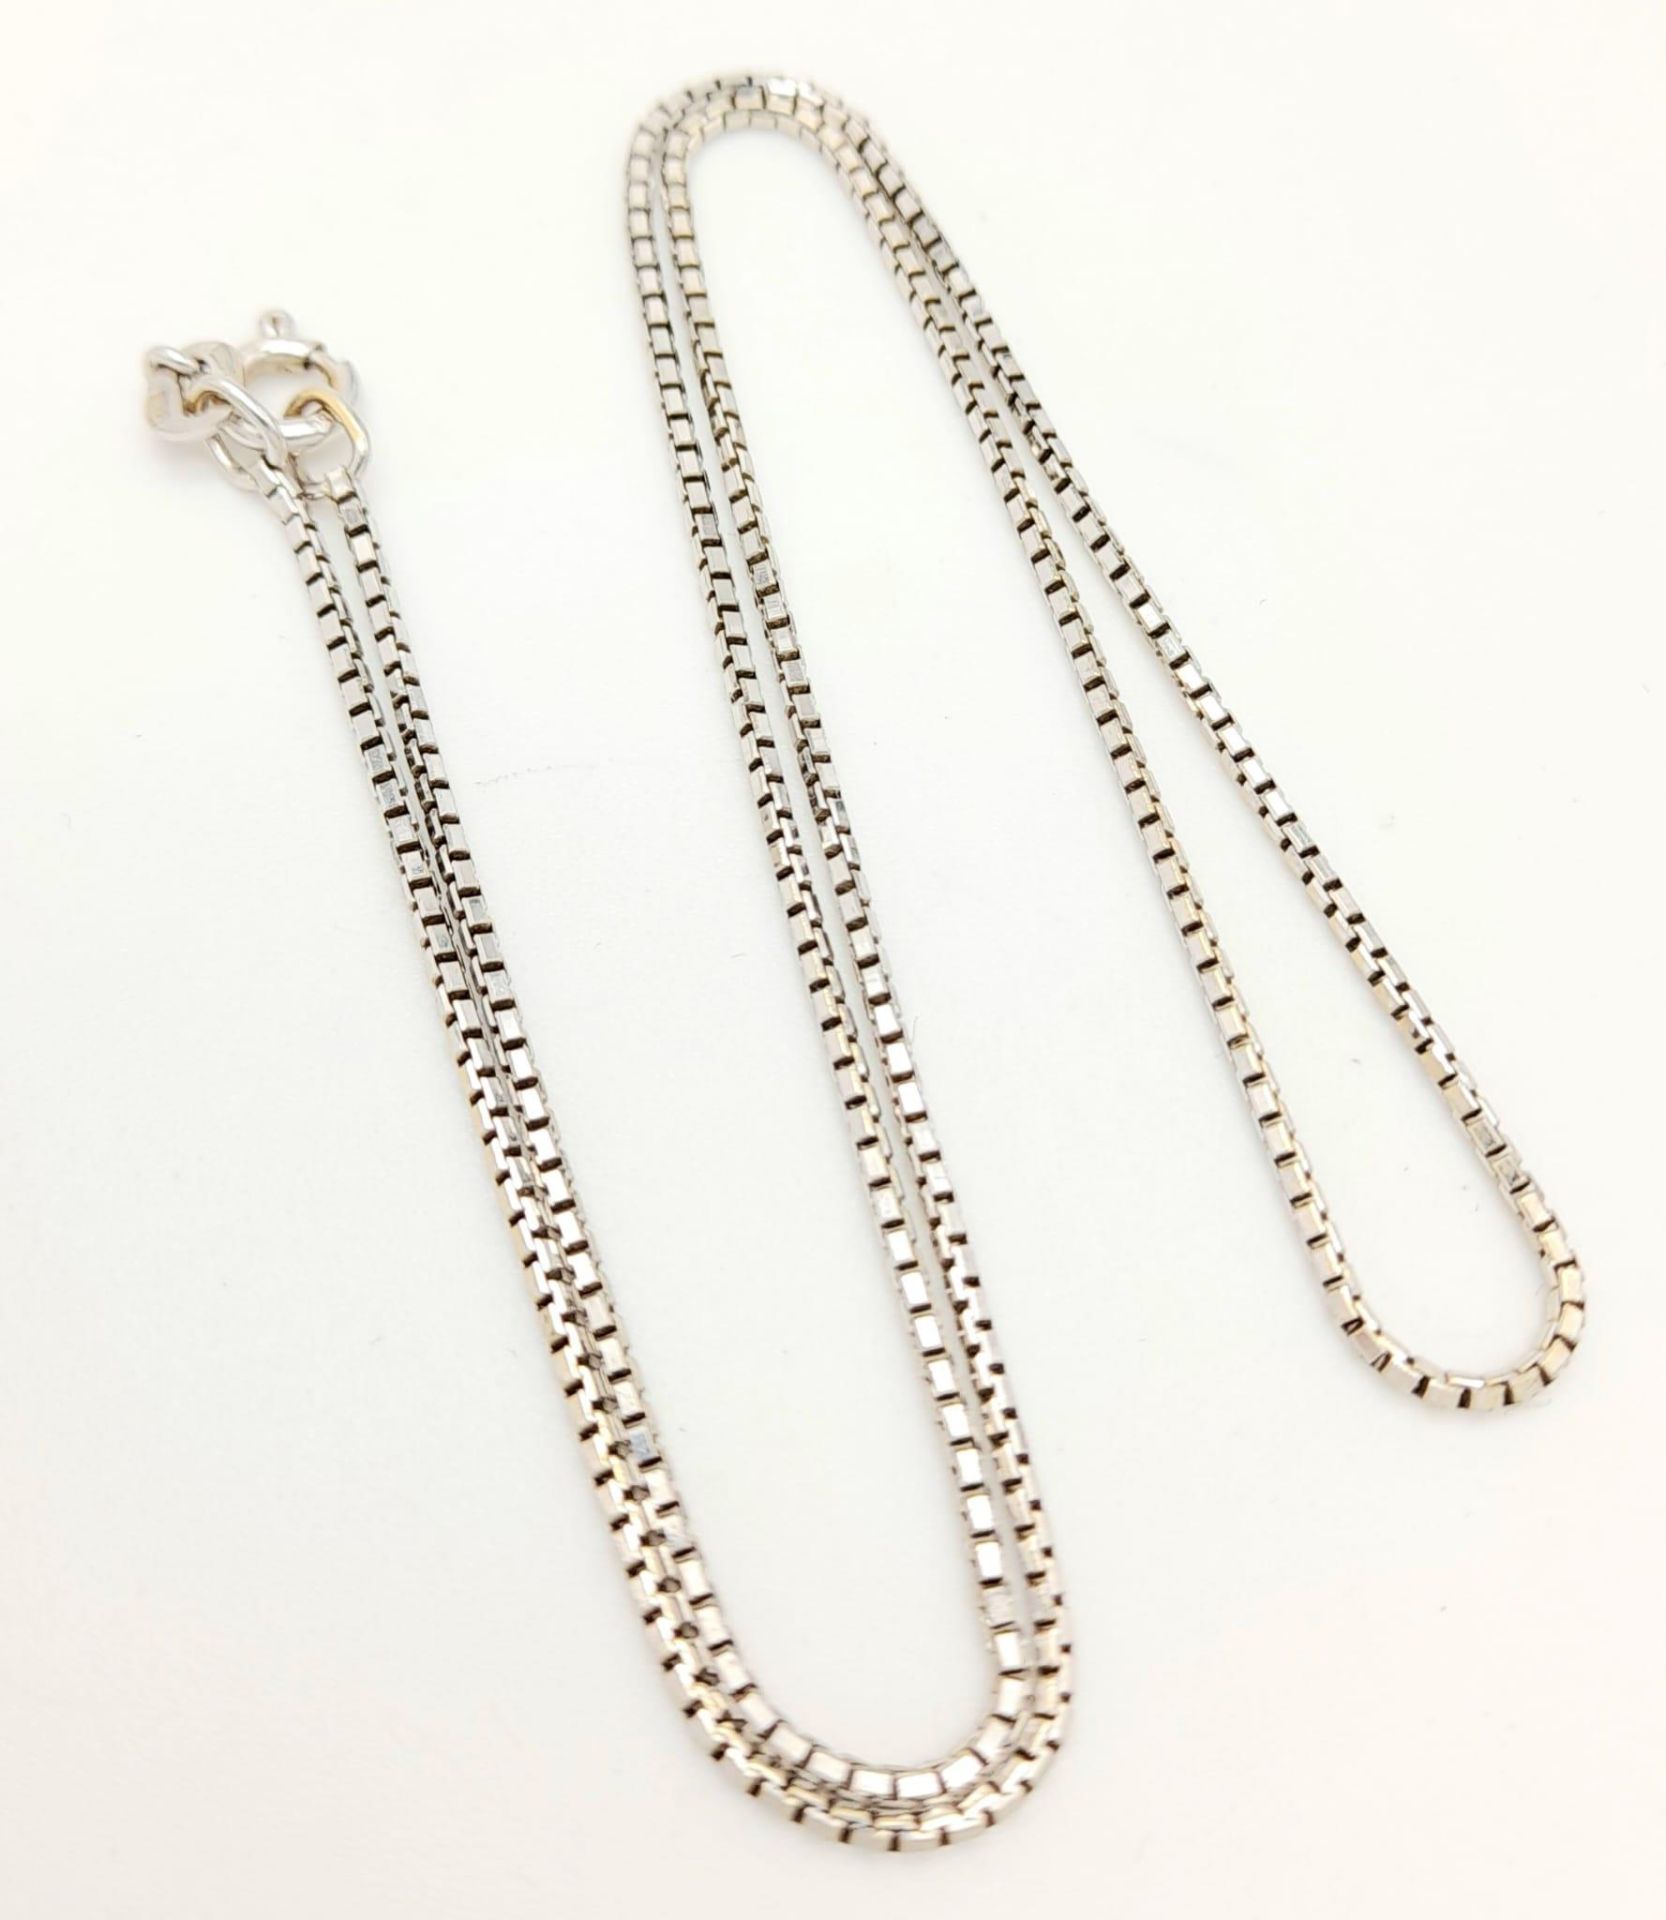 An 18K White Gold Link Necklace. Small rectangular links. 40cm. 4.56g weight.